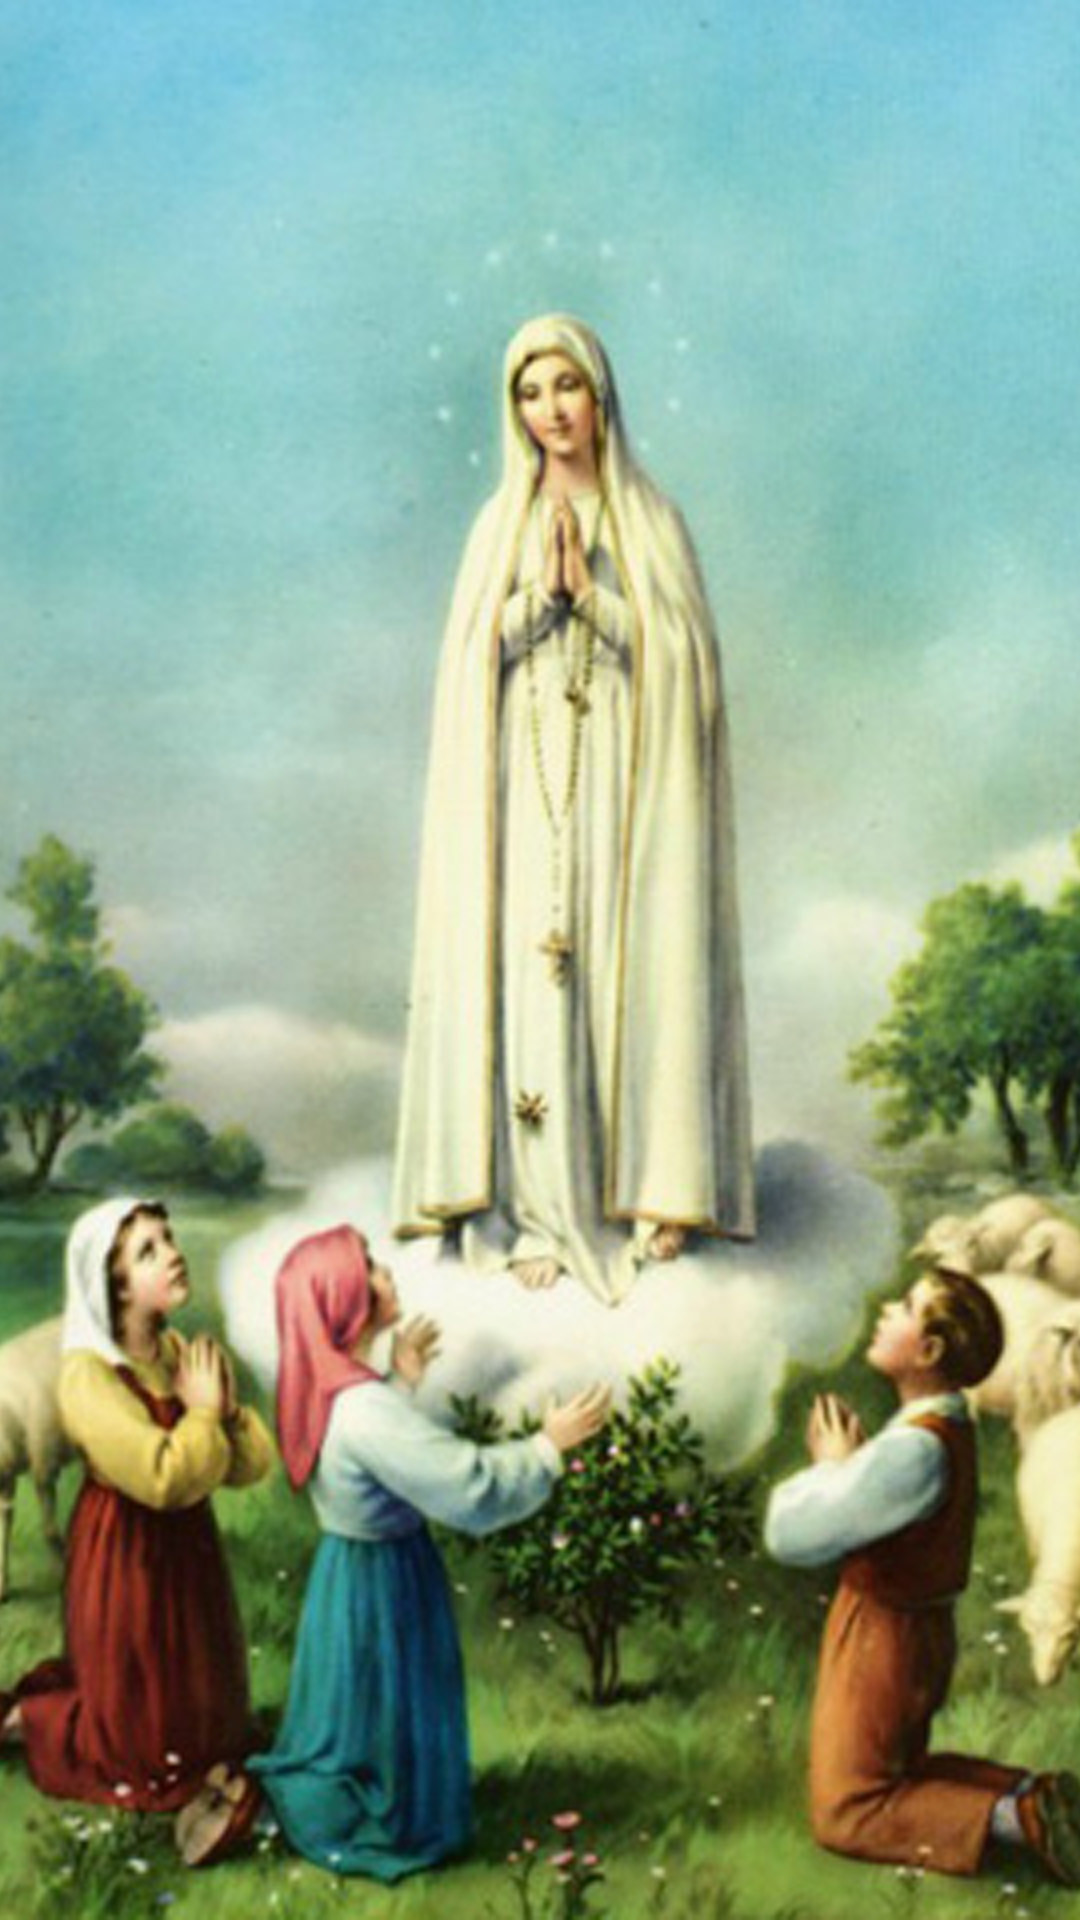 mother mary wallpaper gallery,blessing,pray,mythology,prophet,ritual